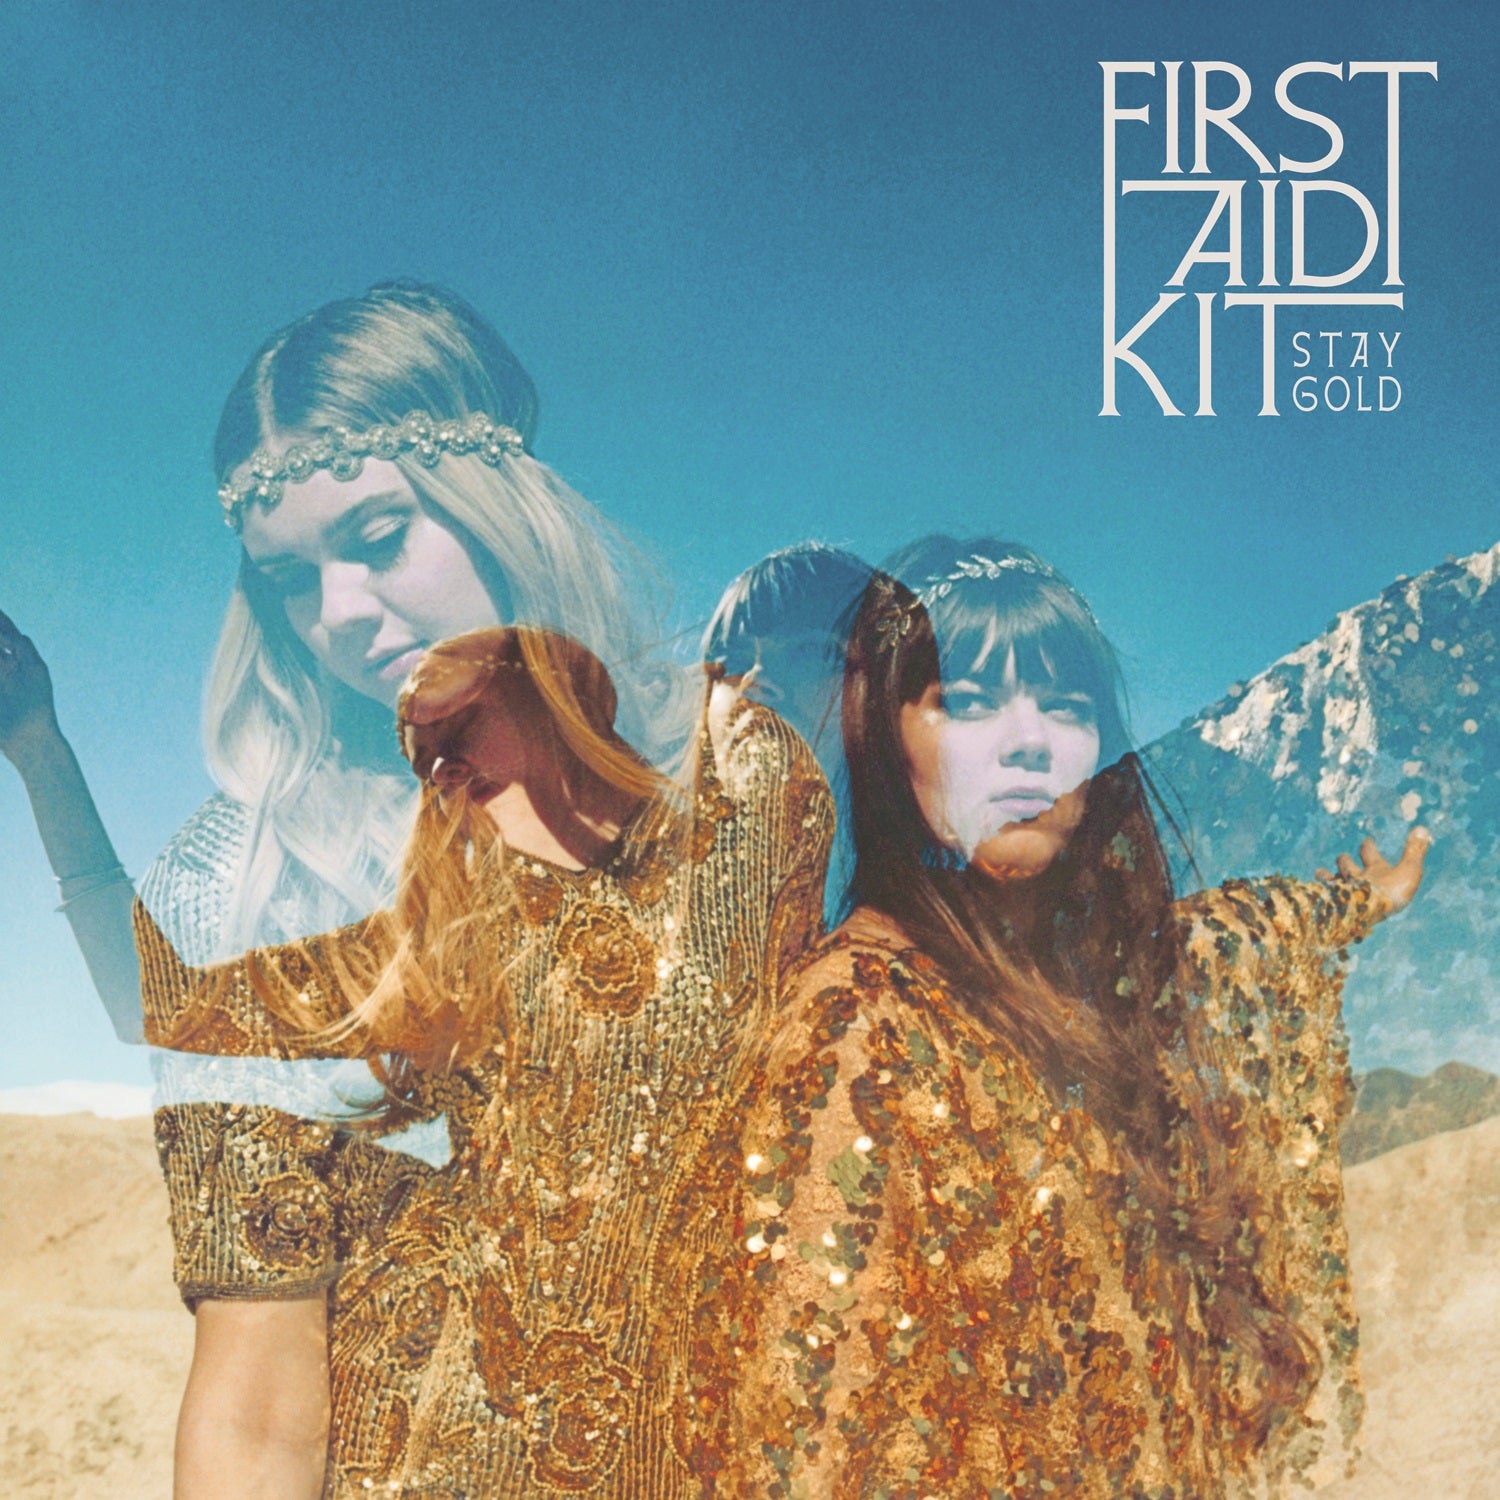 First Aid Kit - Stay Gold (10th Anniversary): Gold Vinyl LP